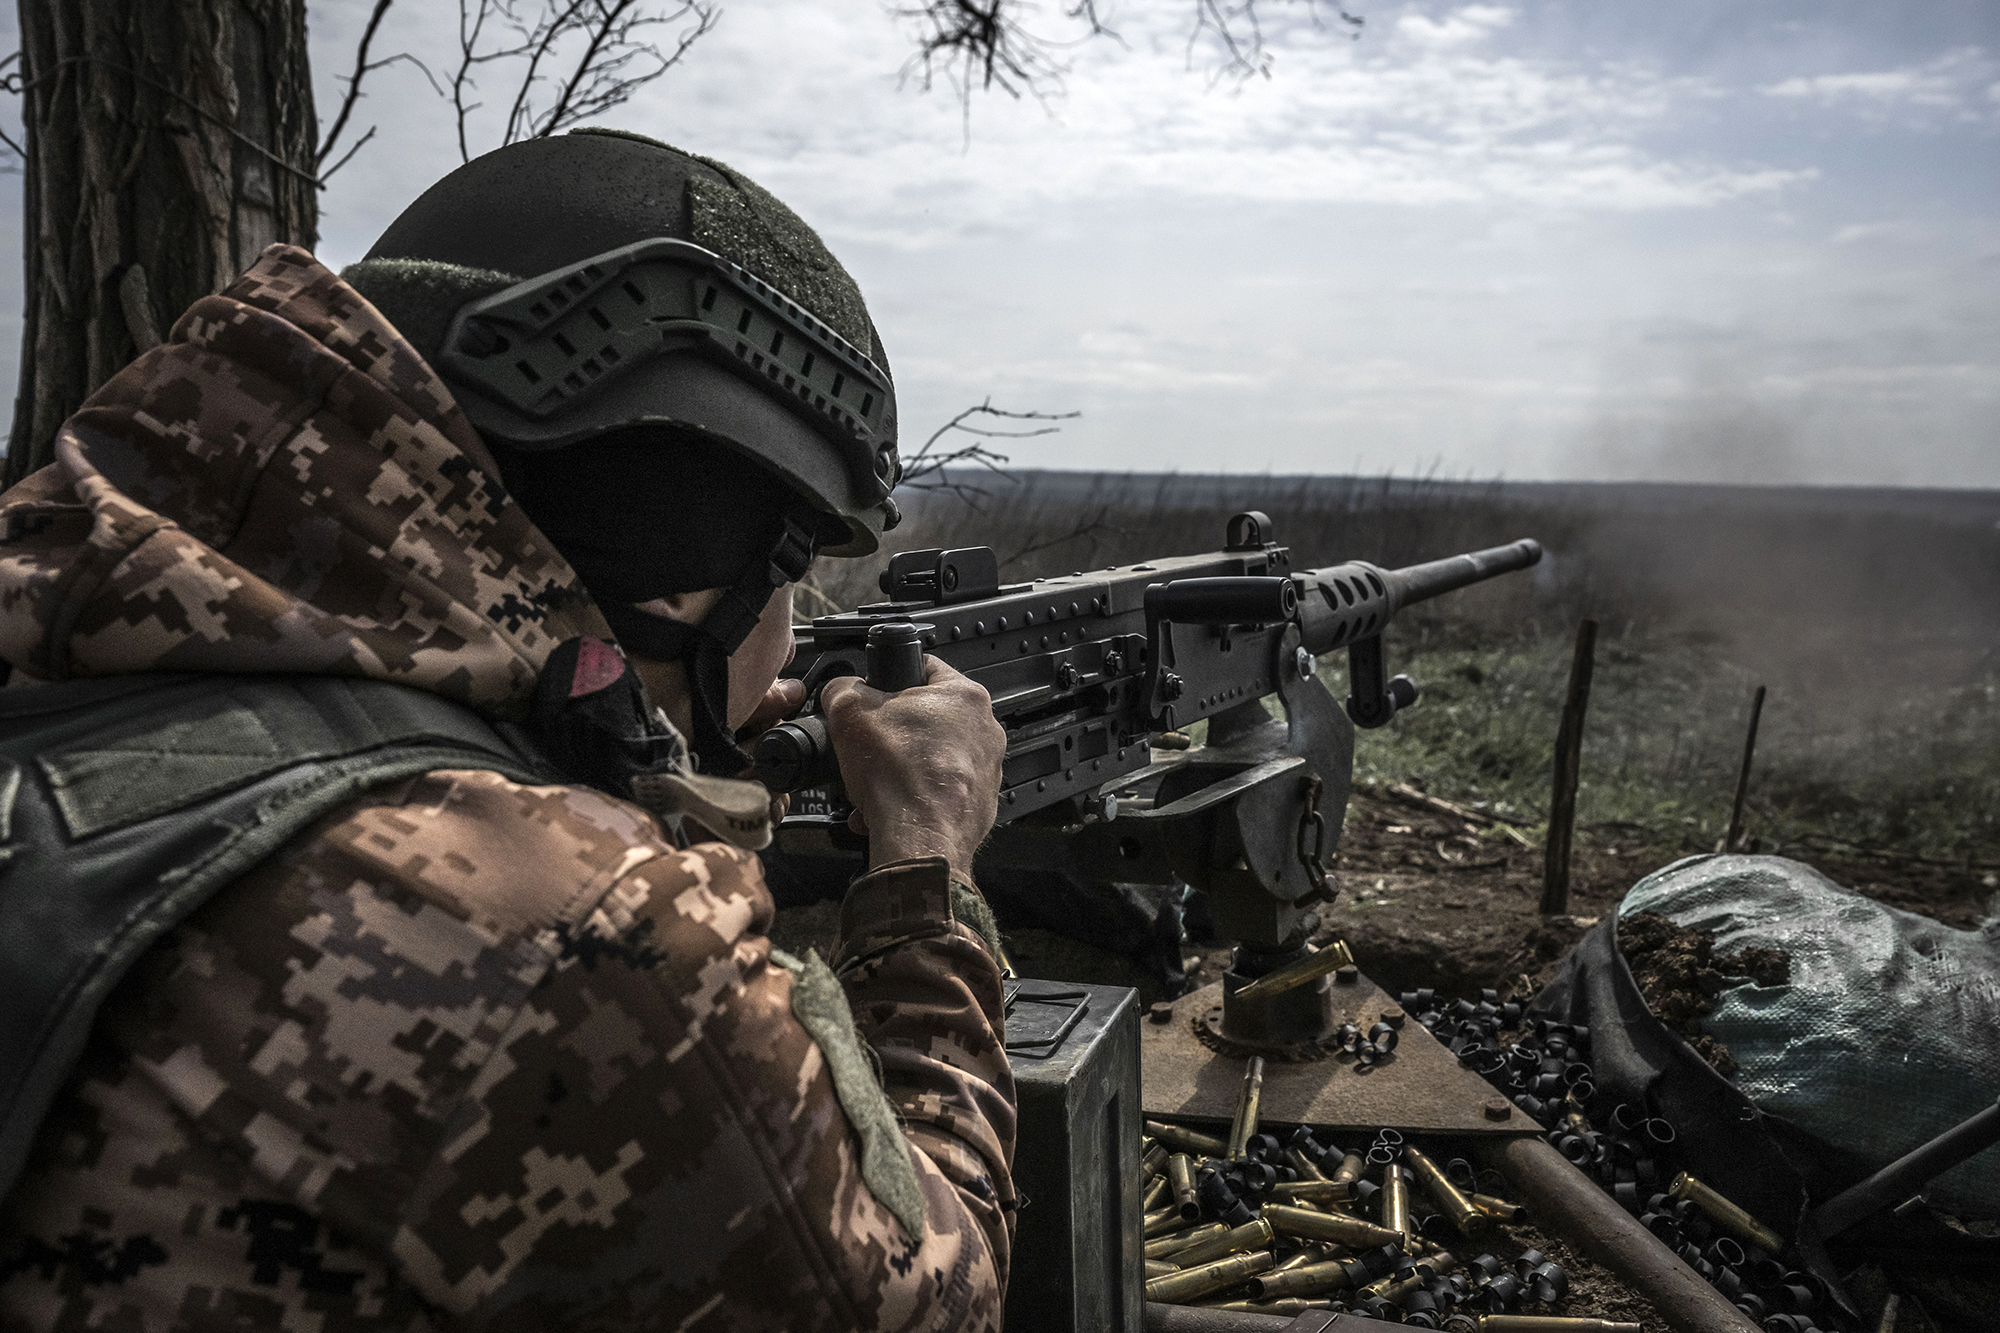 Ukrainian soldiers fire at targets on the front line in Donetsk, Ukraine, on April 18.